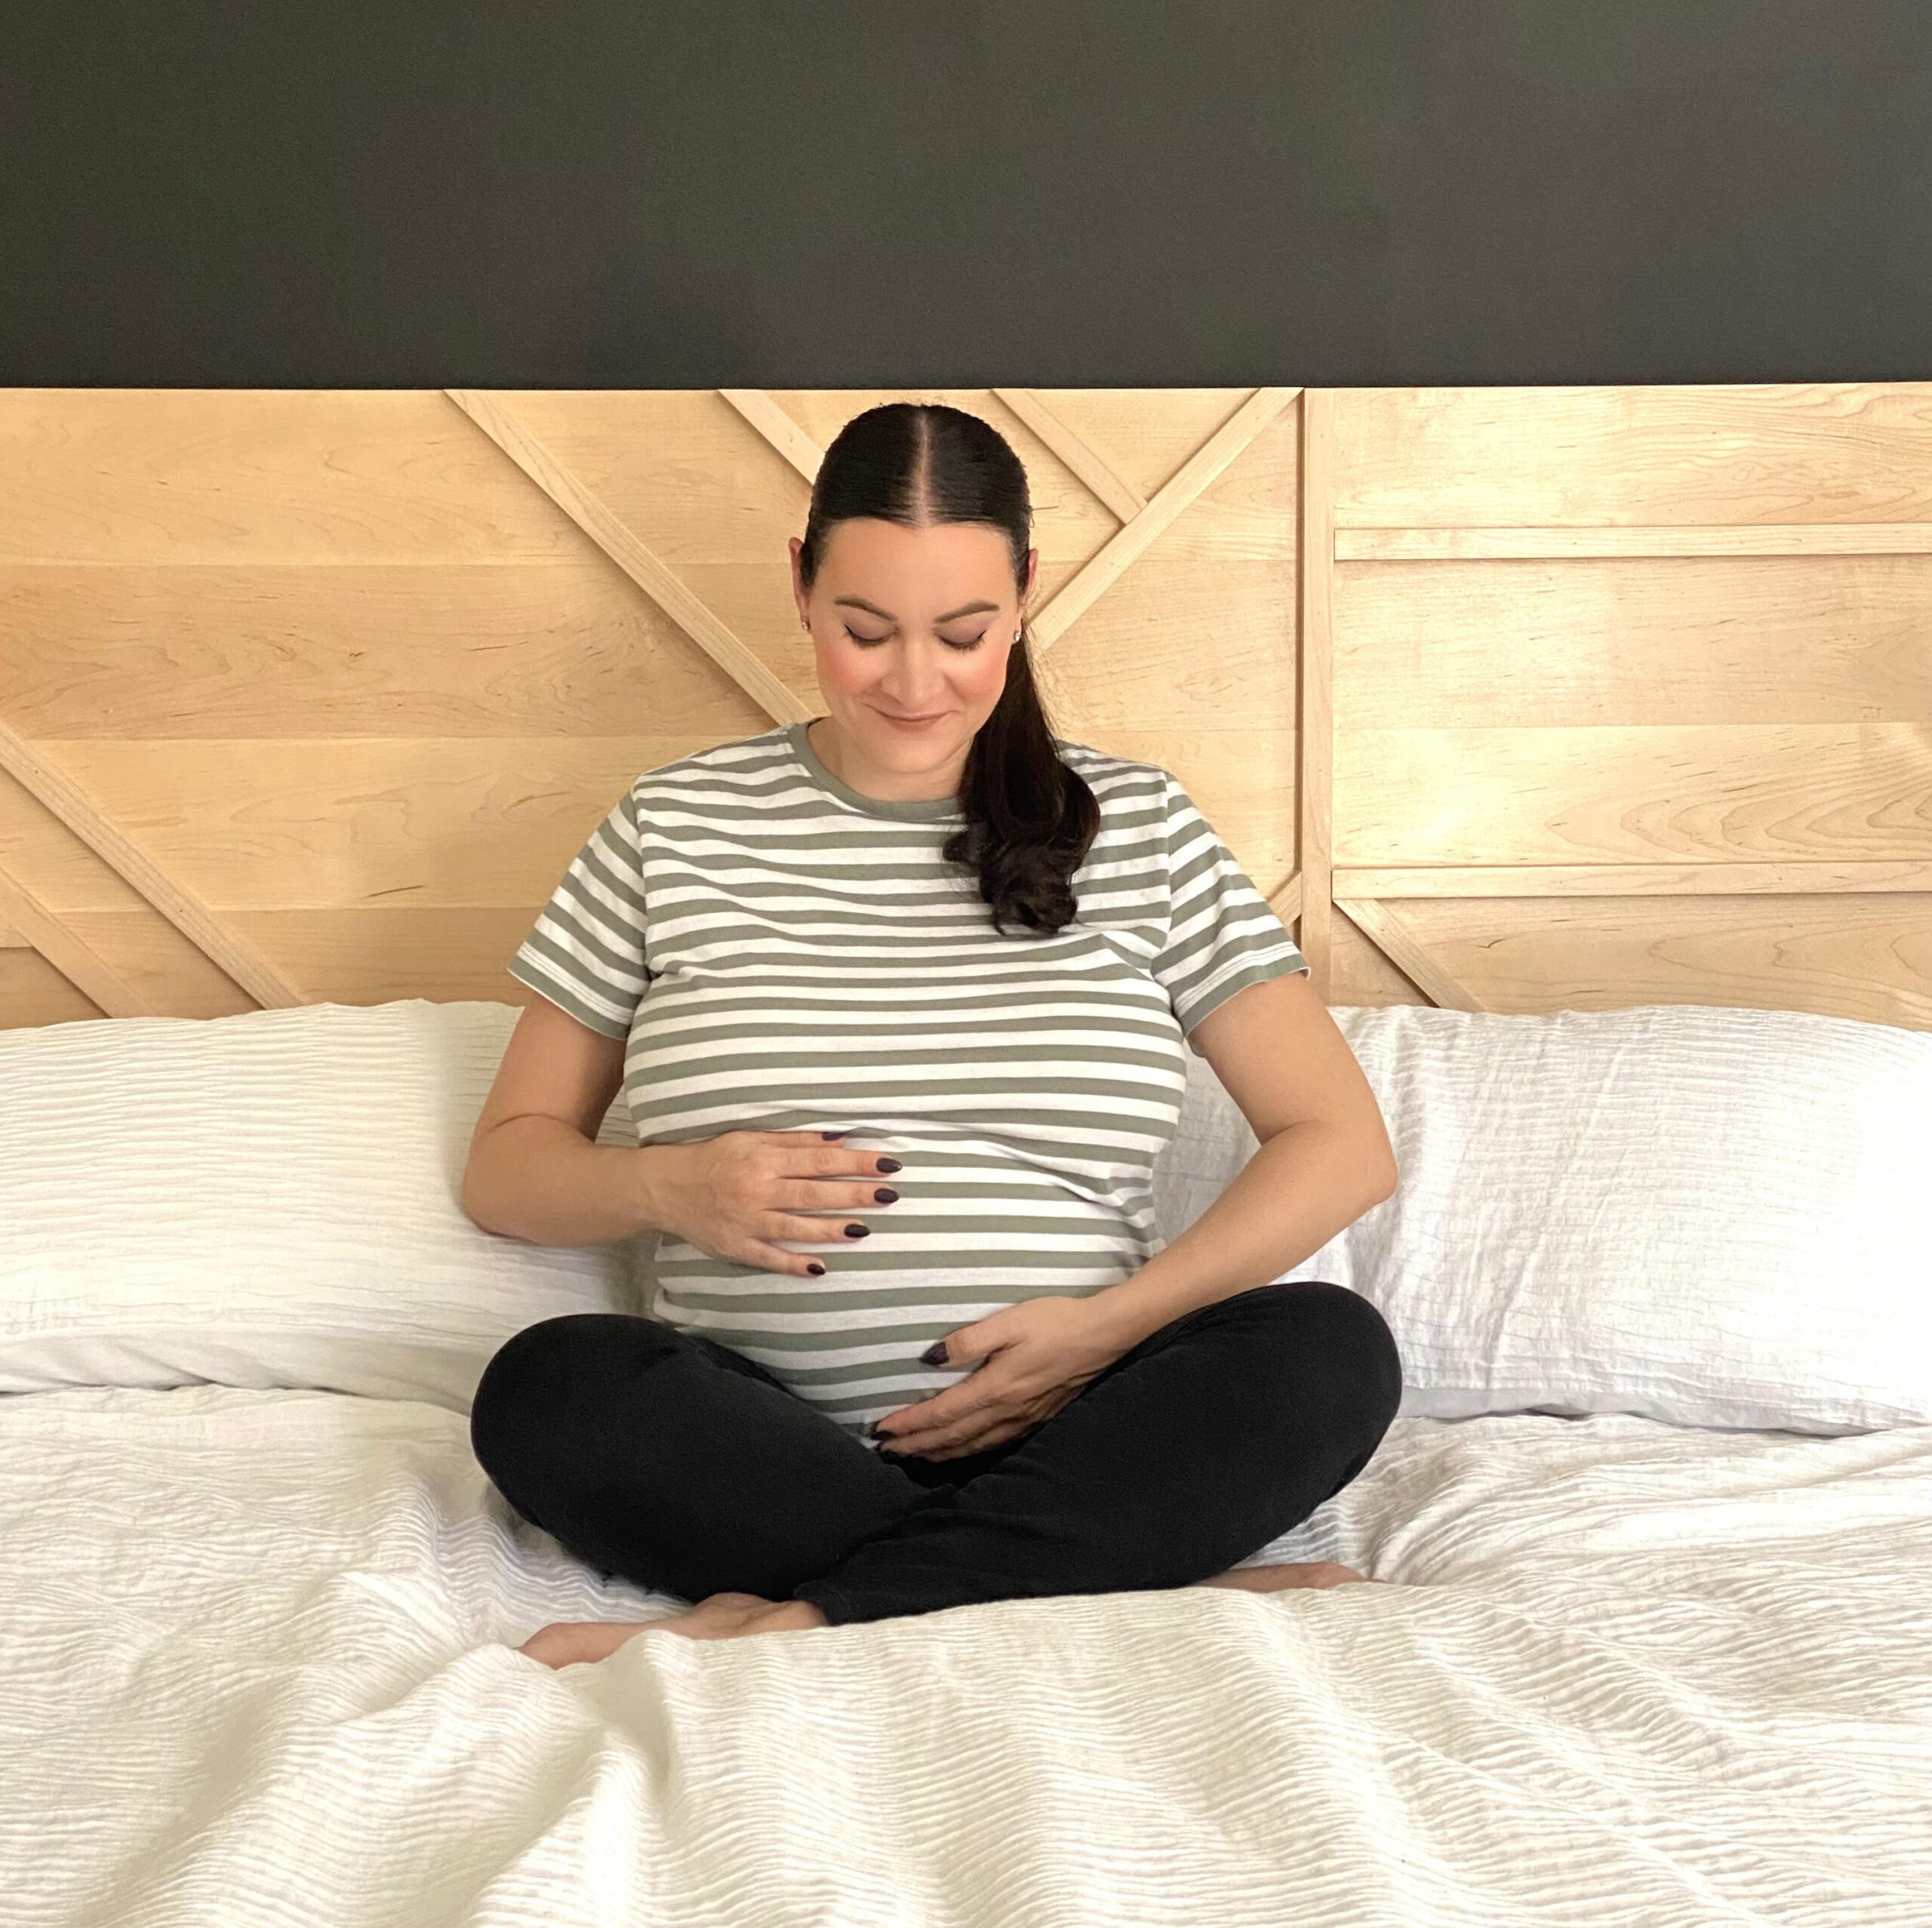 1st Trimester (and beyond) Pregnancy Essentials! – Everyday Glam Guide